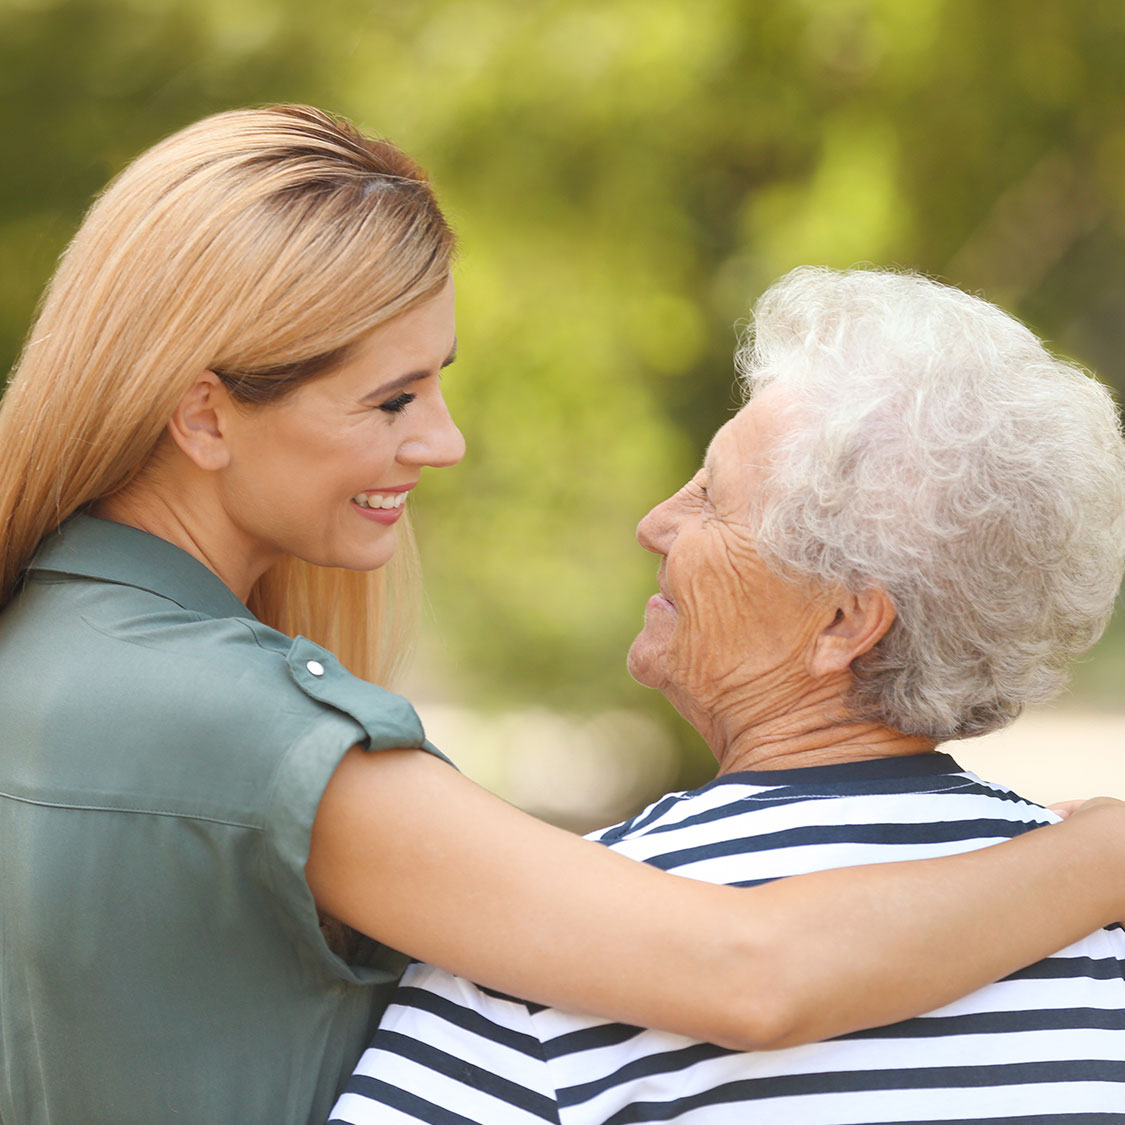 The Best Ways To Help Out an Aging Parent